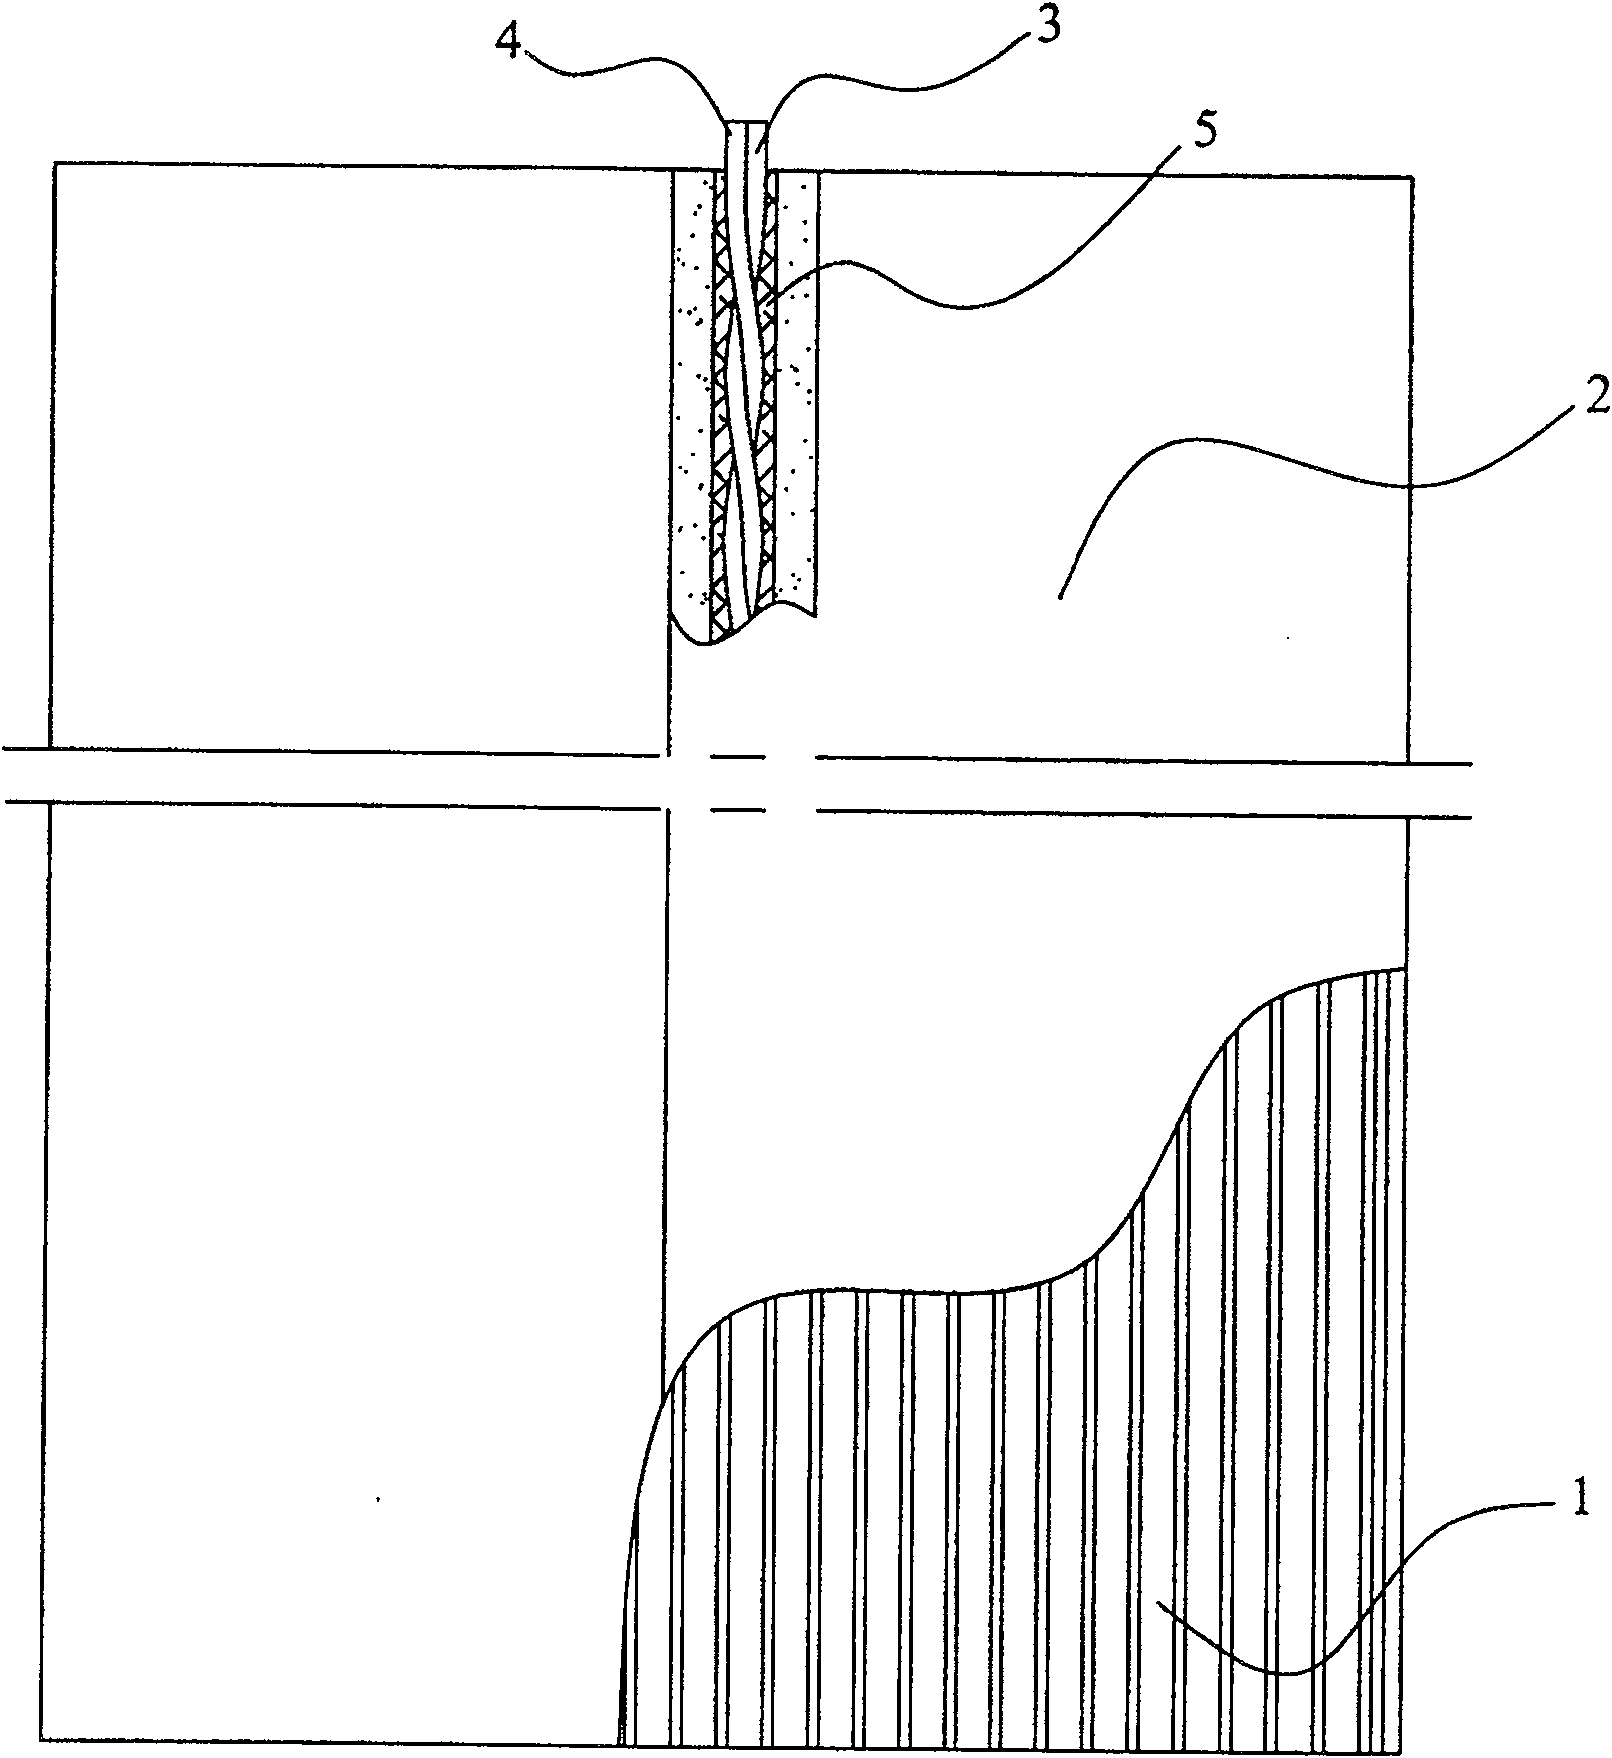 Depth measurement drainage plate structure provided with shielding layer